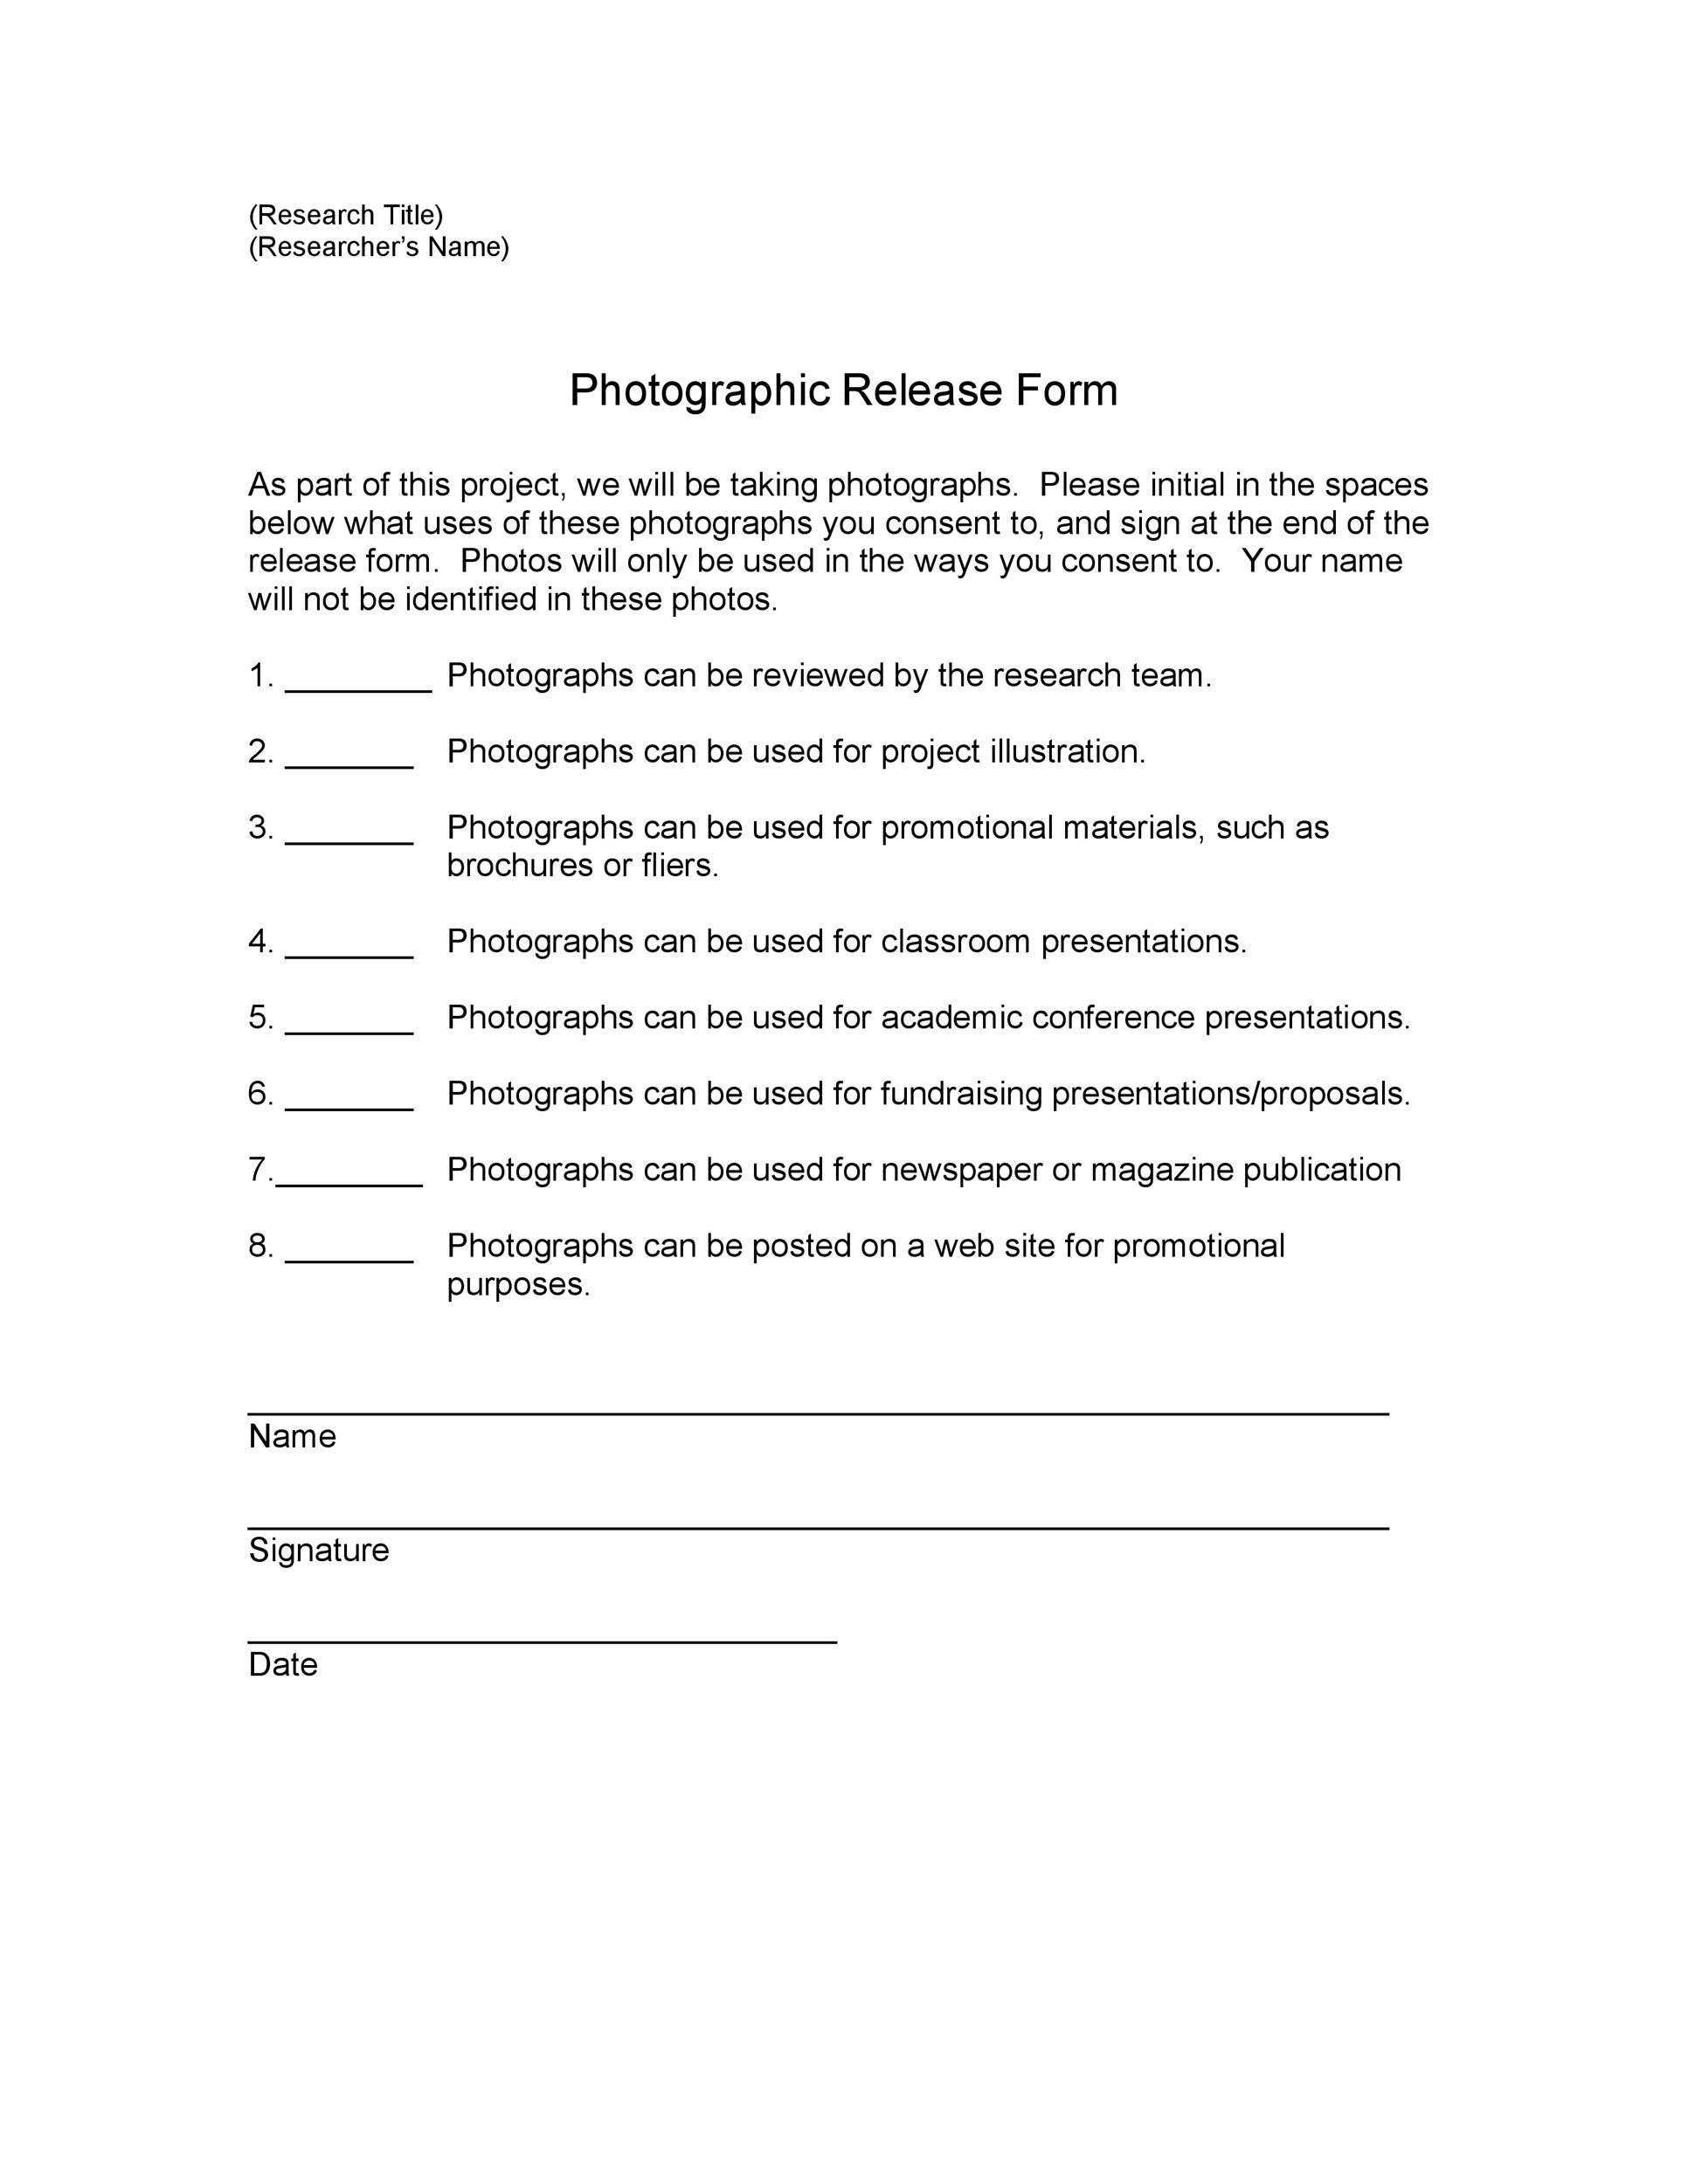 53 FREE Photo Release Form Templates [Word, PDF] Template Lab